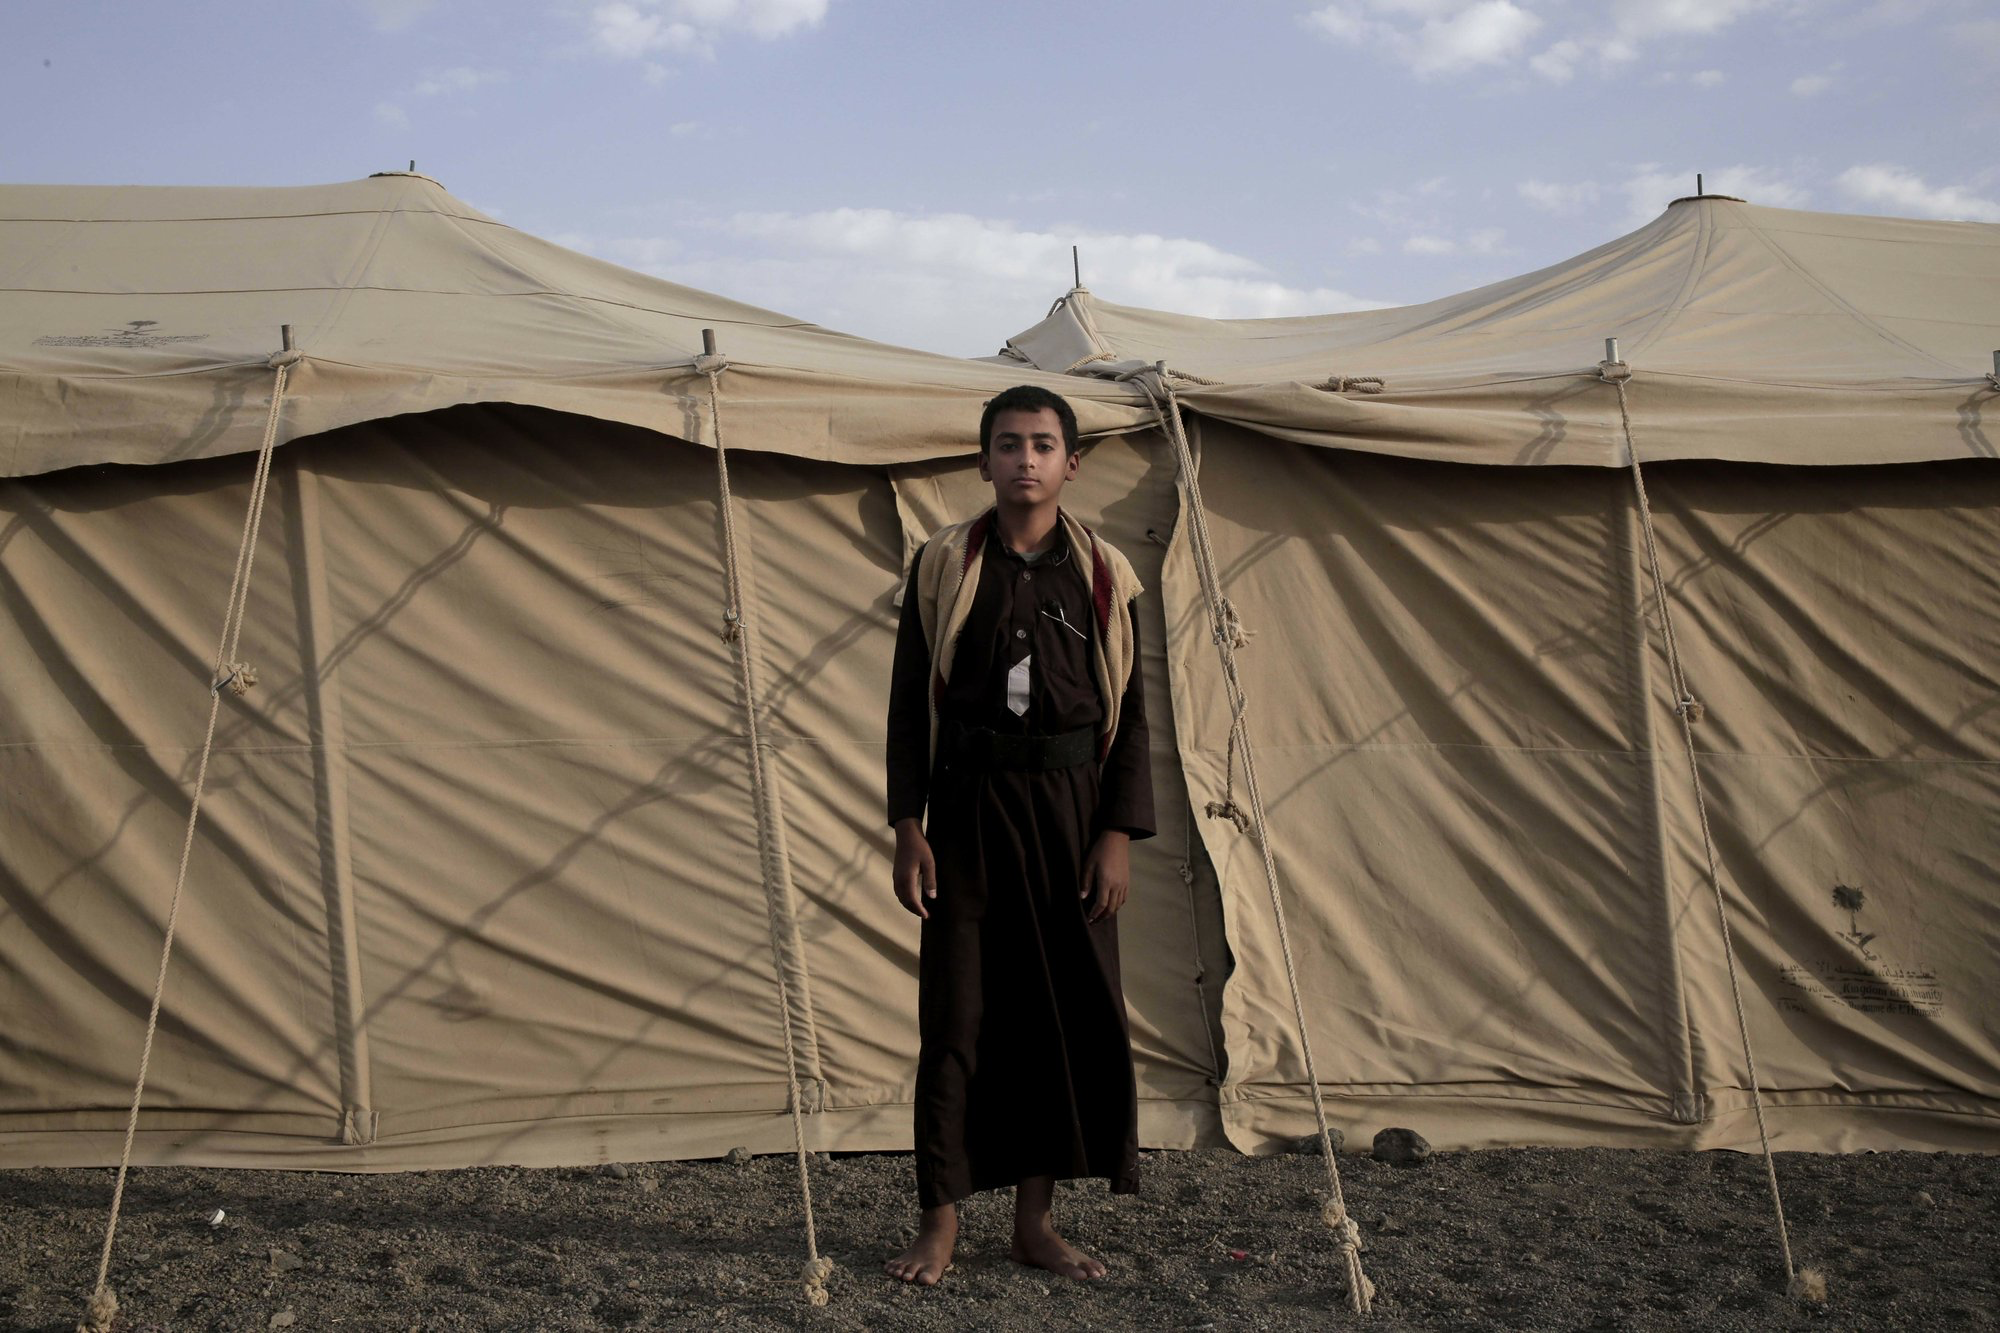 Sadek, a 14 year-old former child soldier, poses for a photograph at a camp for displaced persons where he took shelter with his family, in Marib, Yemen, in this July 27, 2018, photo. Houthi rebels plucked him from his home and promised he would only run supplies to adult fighters, but it wasn’t long before he found himself deployed to fight on the front lines of Yemen's civil war. Image by Nariman El-Mofty / AP News. Yemen, 2018.